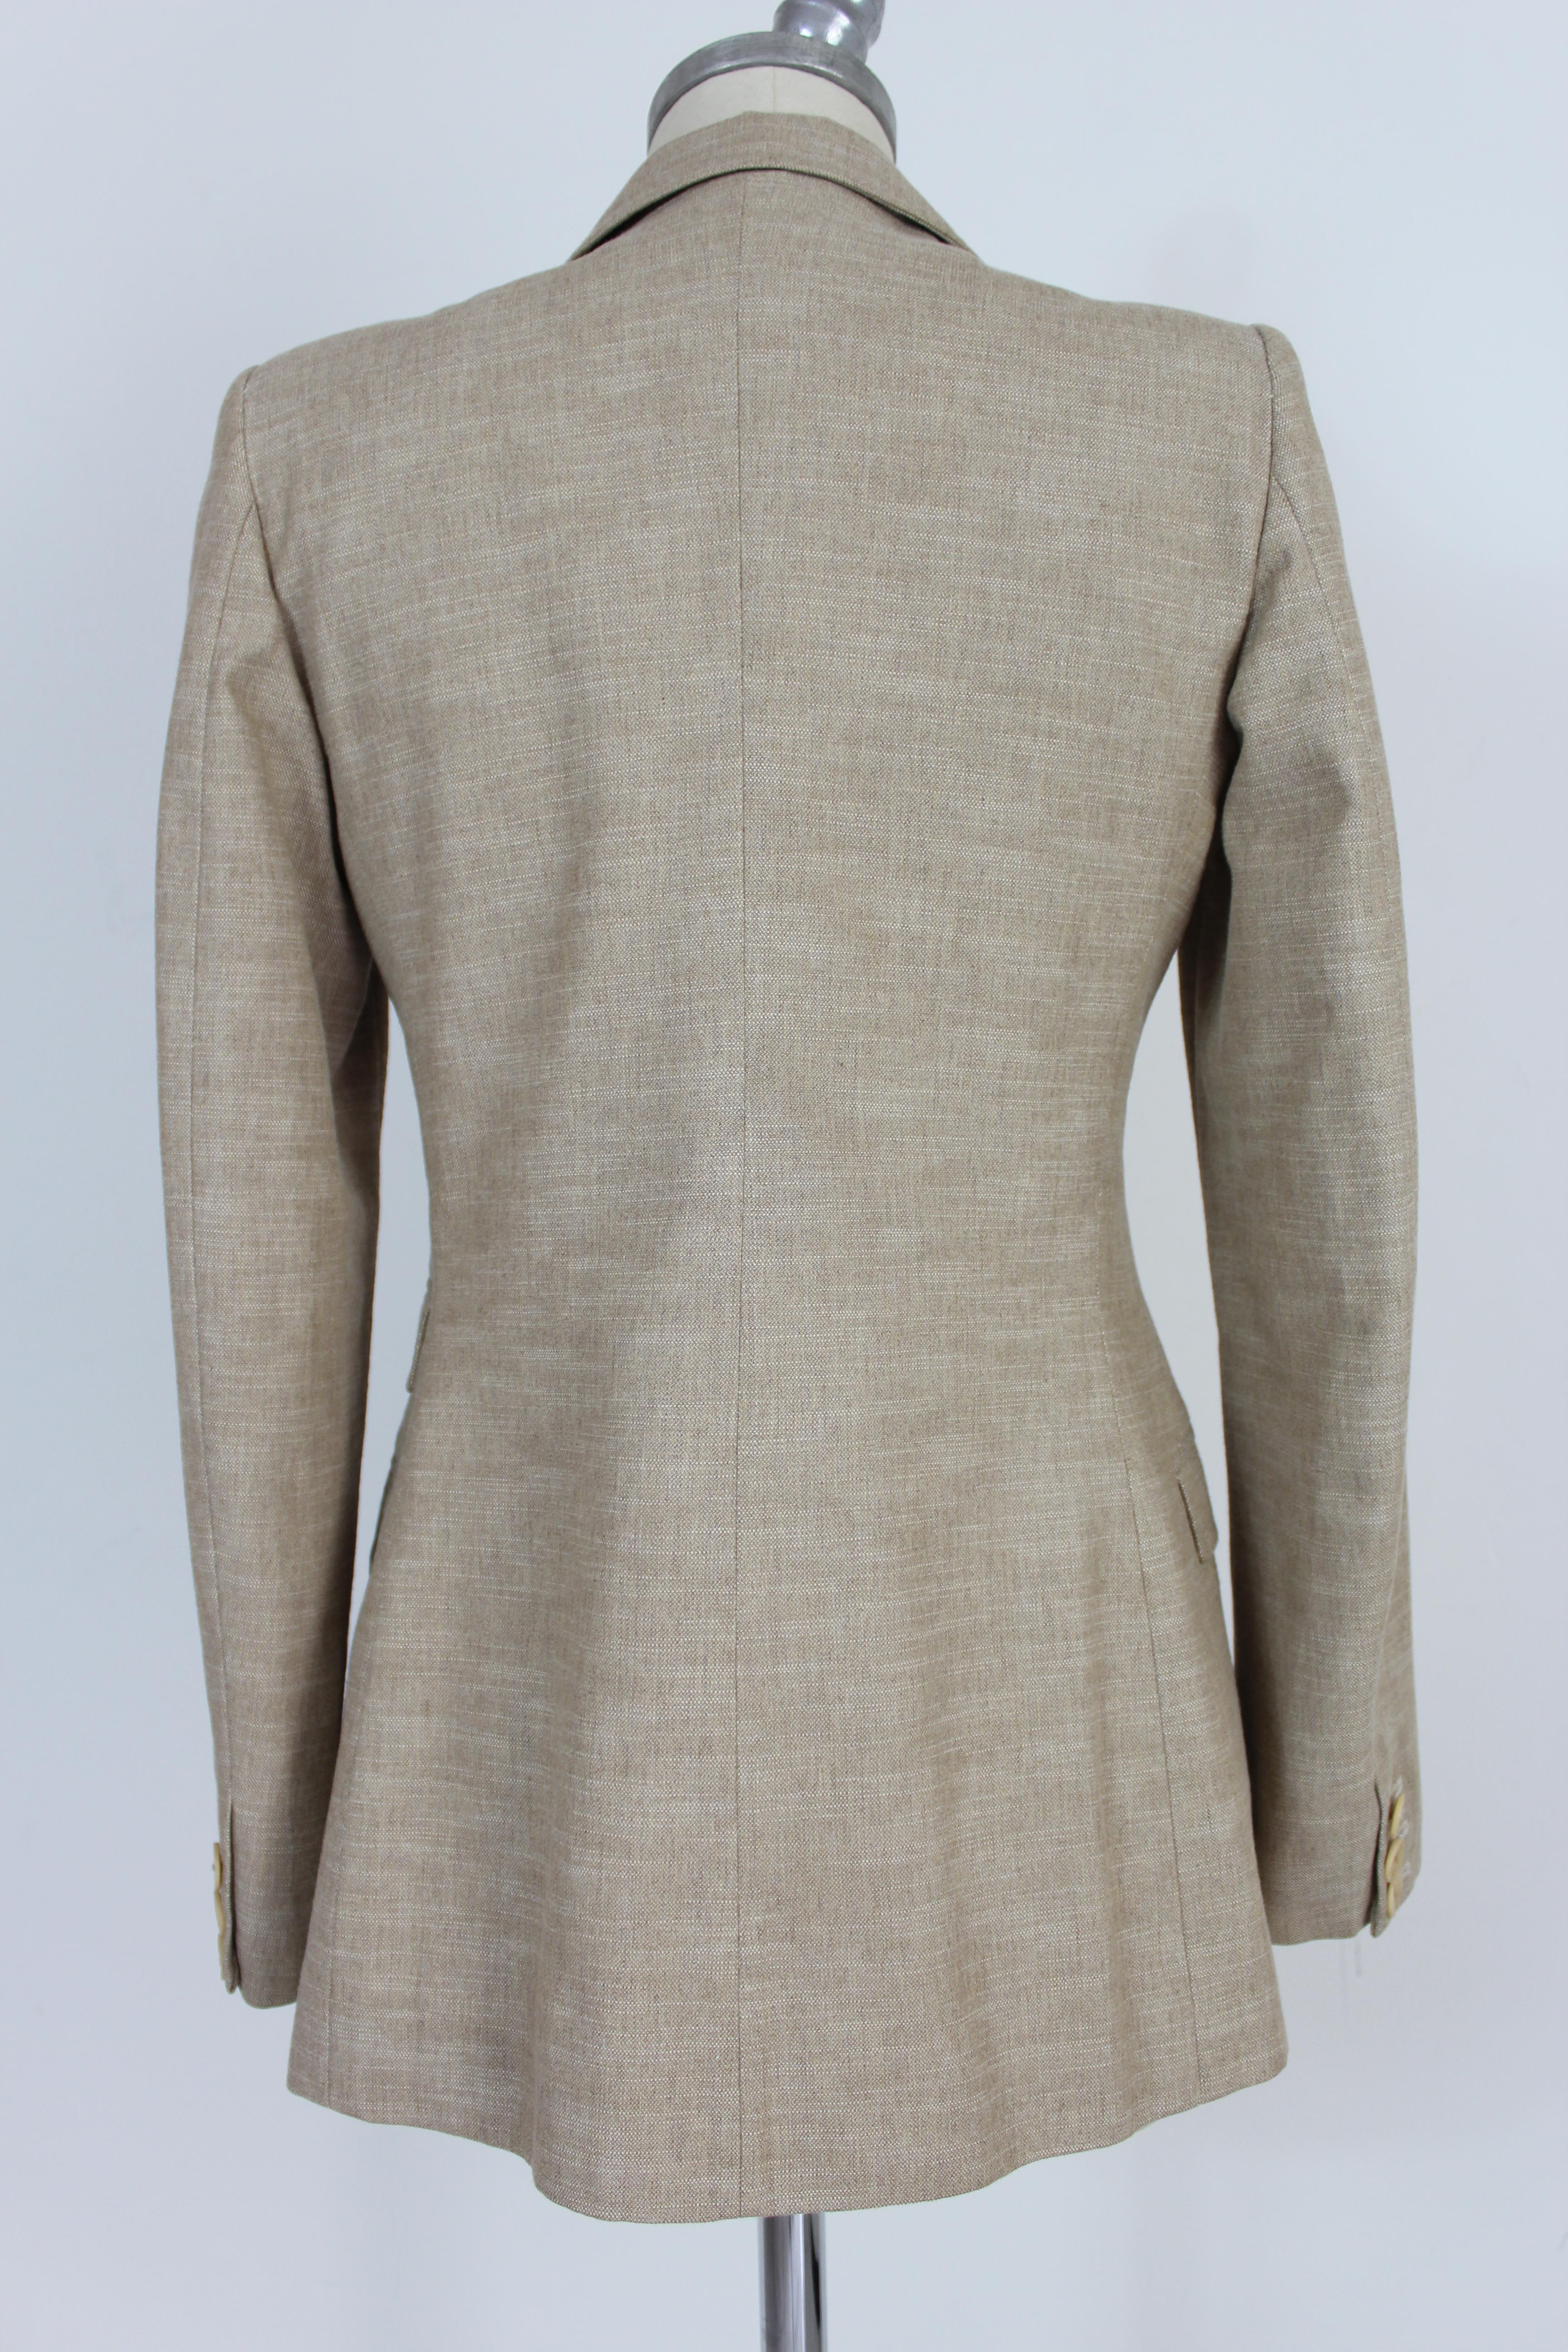 Versus by Versace vintage 90s women's jacket. Slim fit classic jacket, beige, 44% cotton 39% viscose 17% linen, inside the fabric is 100% finished with rabbit hair. Made in Italy. Excellent vintage condition.

Size: 44 It 10 Us 12 Uk

Shoulder: 42